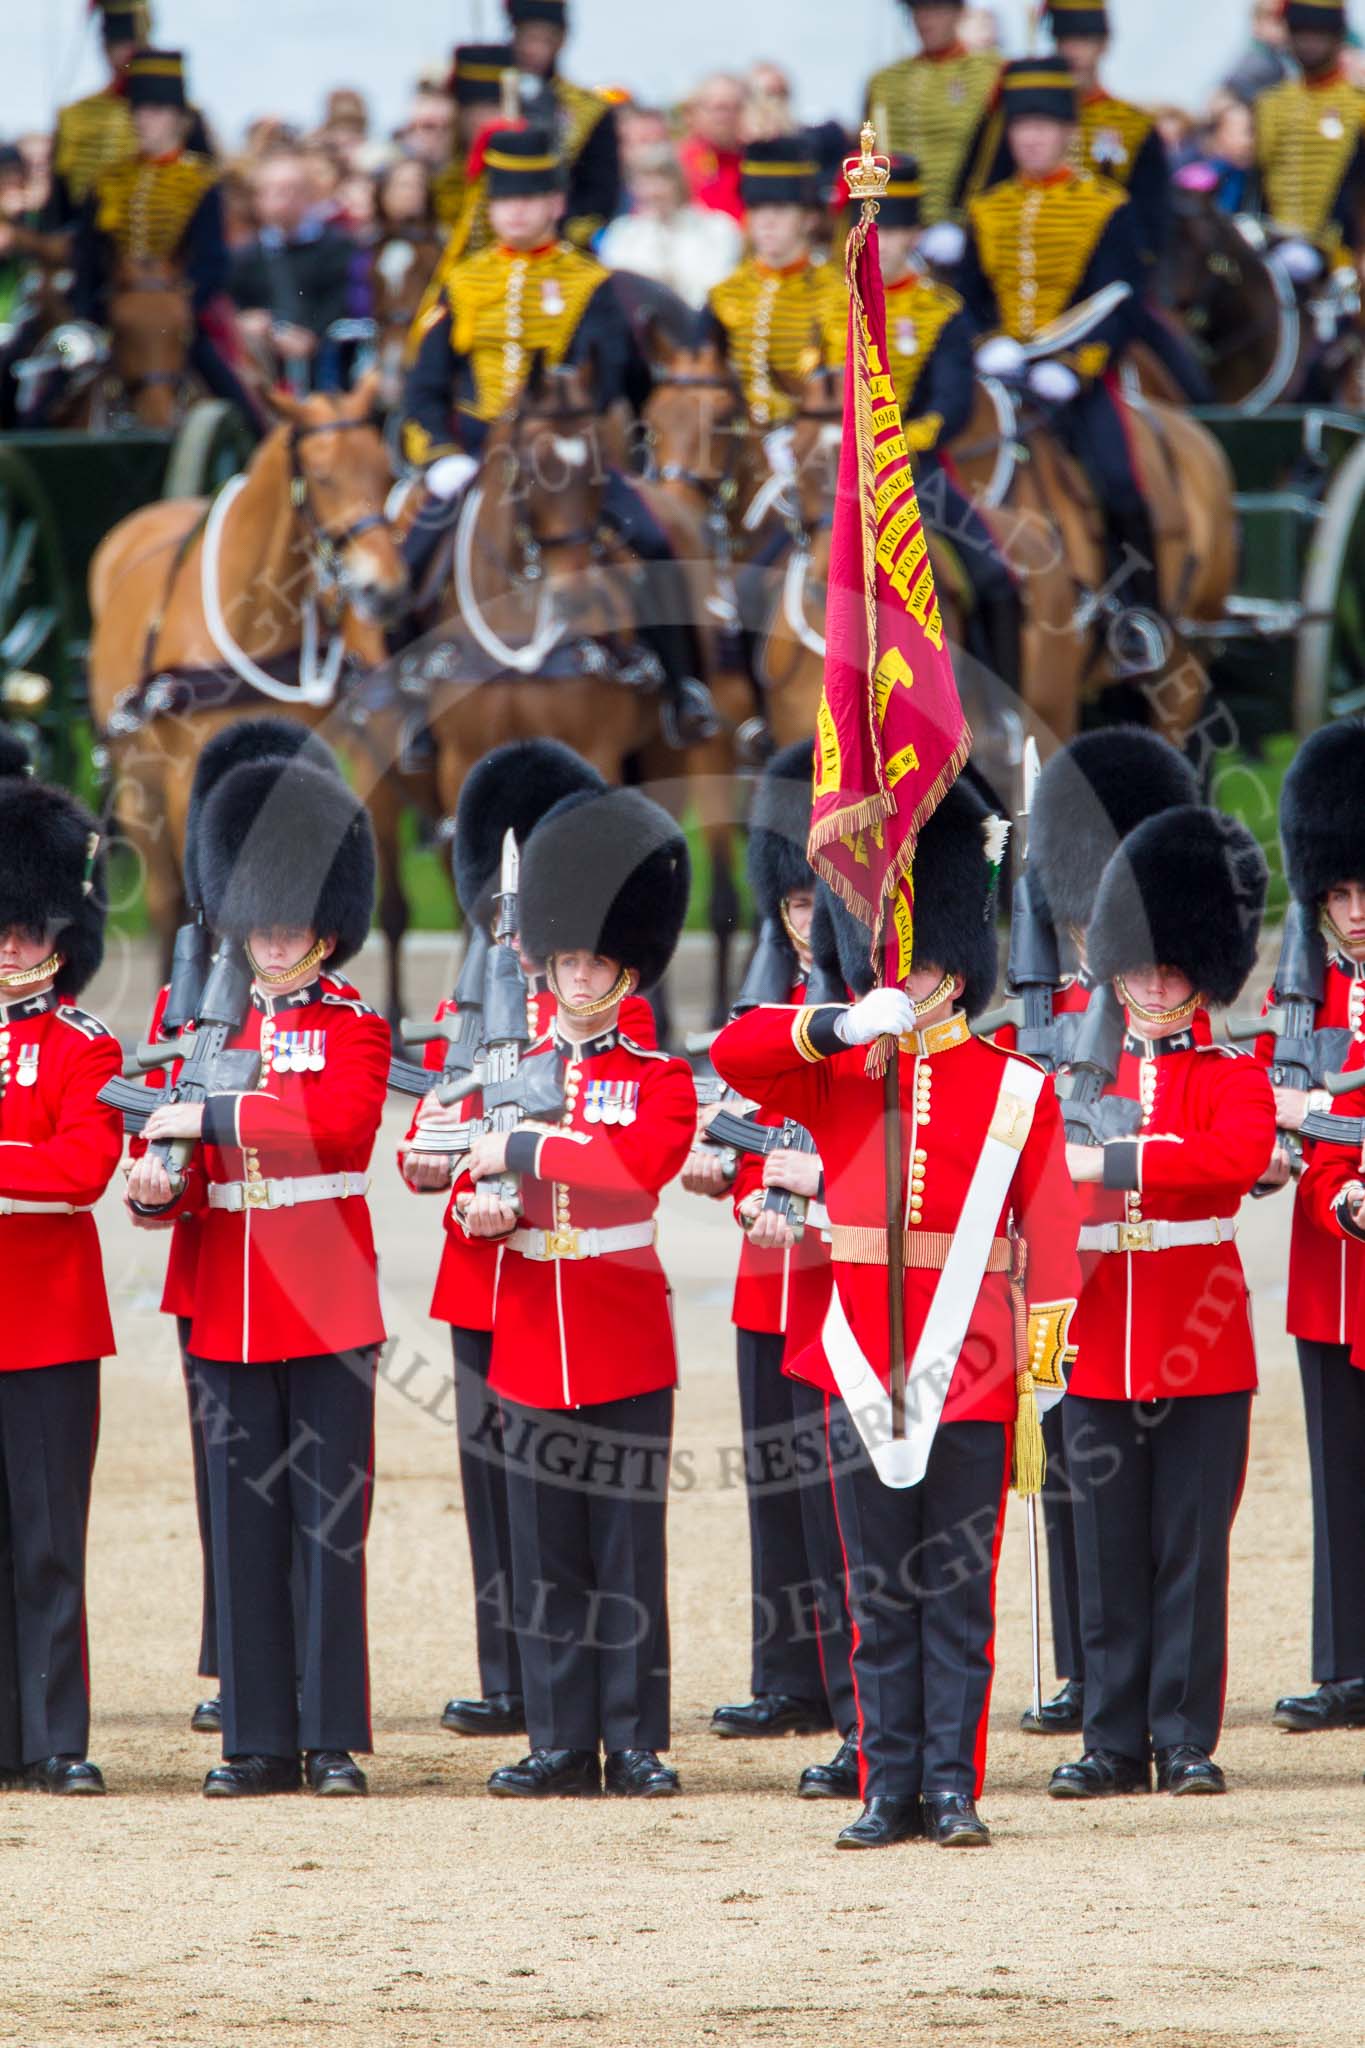 Trooping the Colour 2013: The Ensign, Second Lieutenant Joel Dinwiddle, and the Escort to the Colour,are back at their initial position, when they were the Escort for the Colour. The guardsmen are changing arms. Image #507, 15 June 2013 11:28 Horse Guards Parade, London, UK